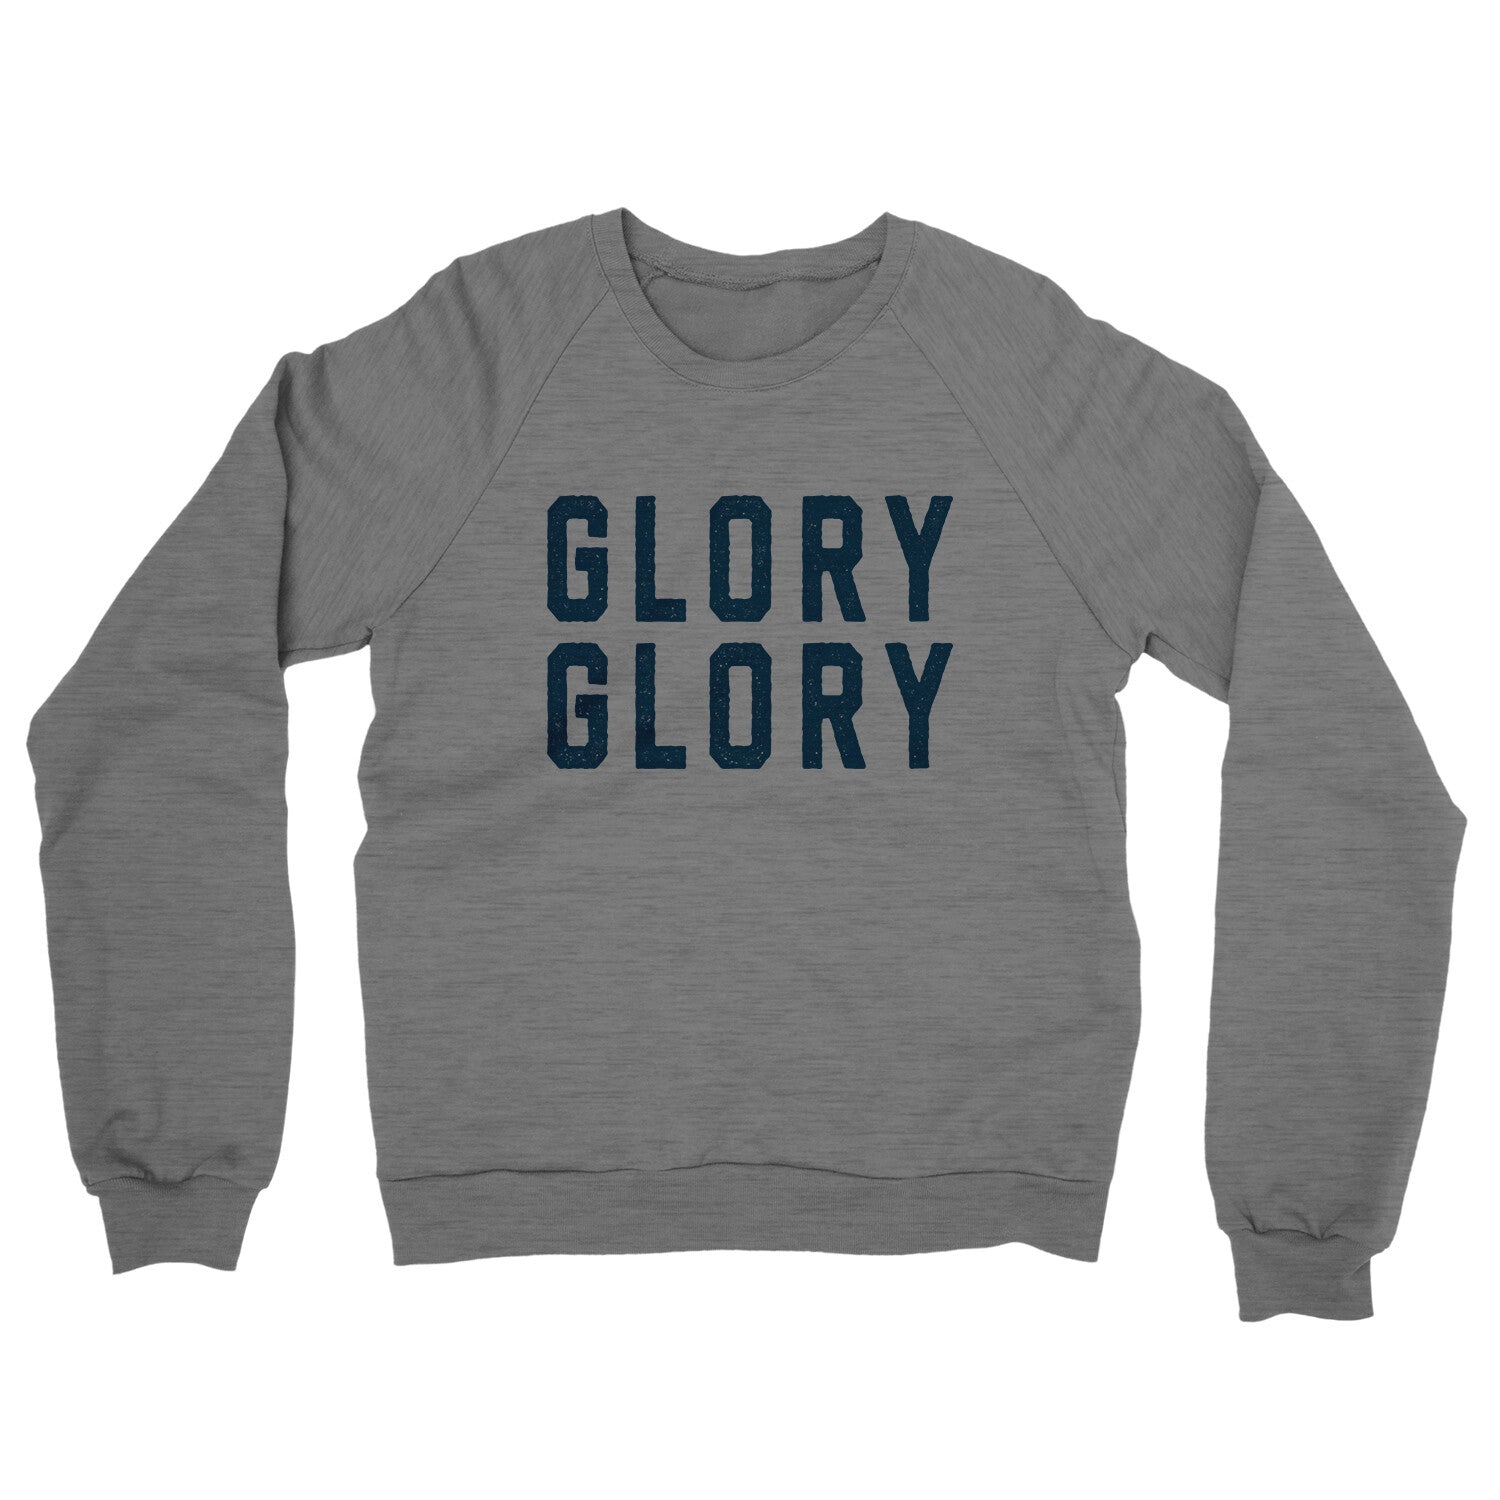 Glory Glory in Graphite Heather Color